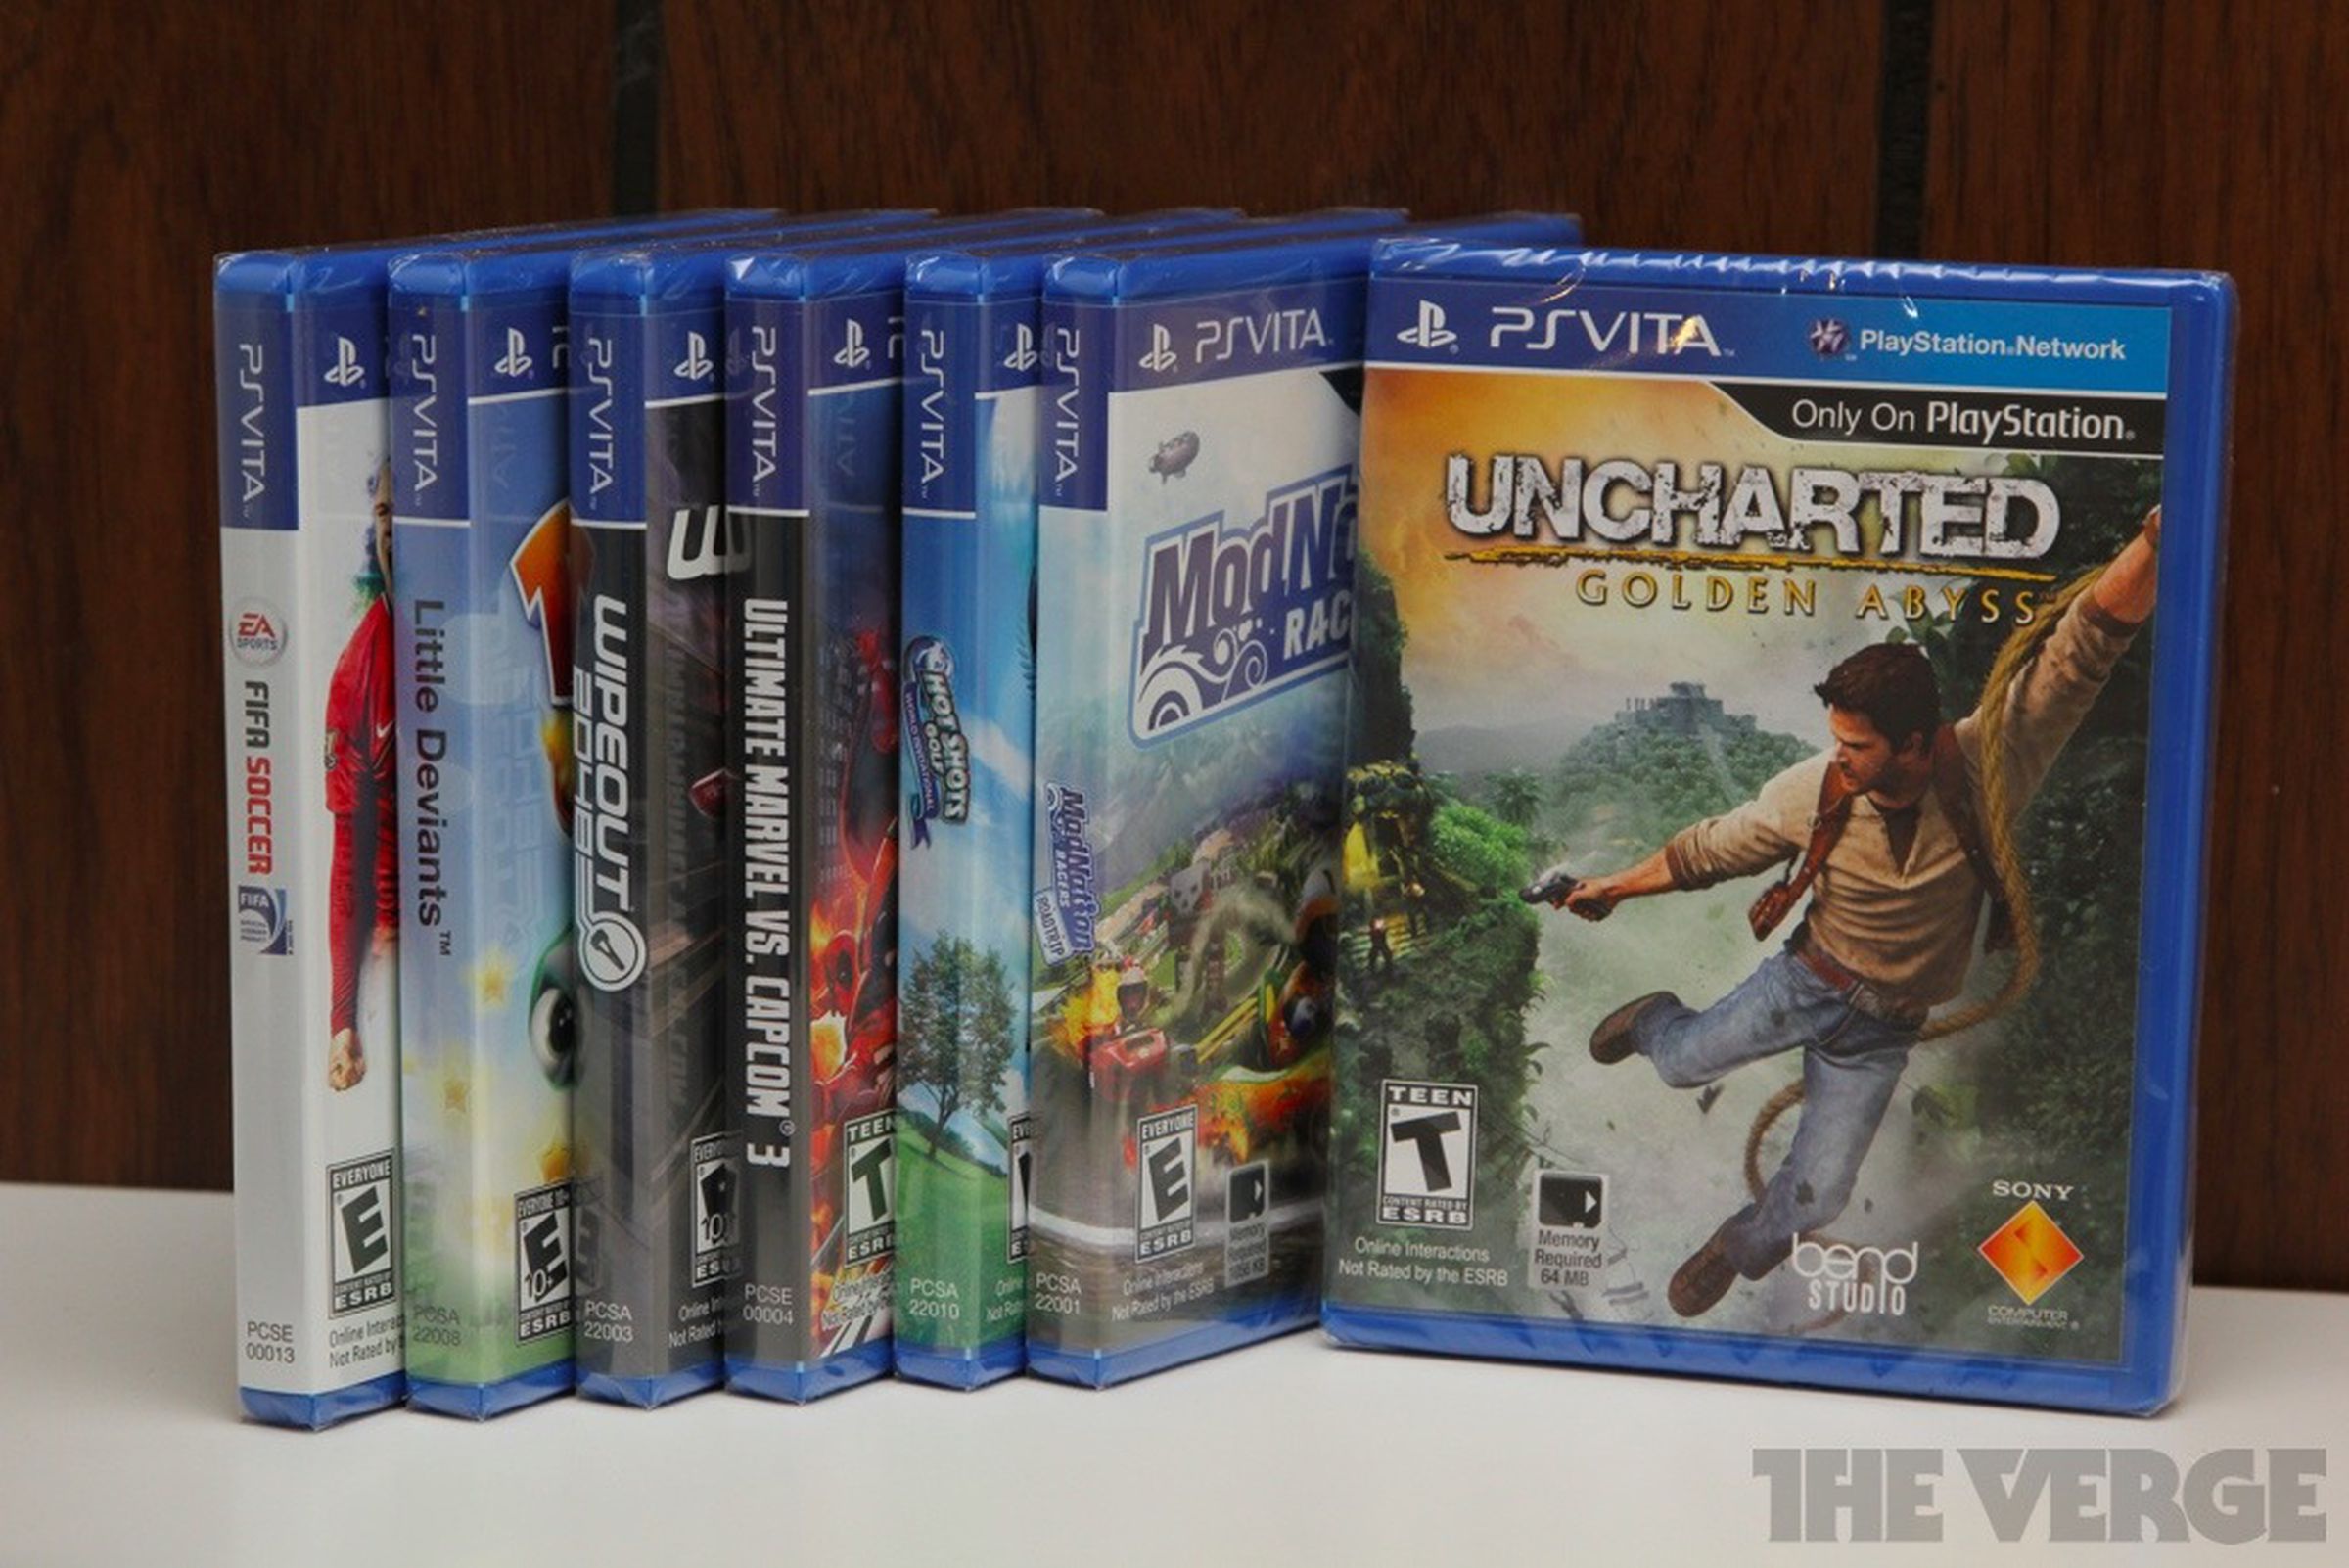 PlayStation Vita AT&T 3G / Wi-Fi unboxing pictures